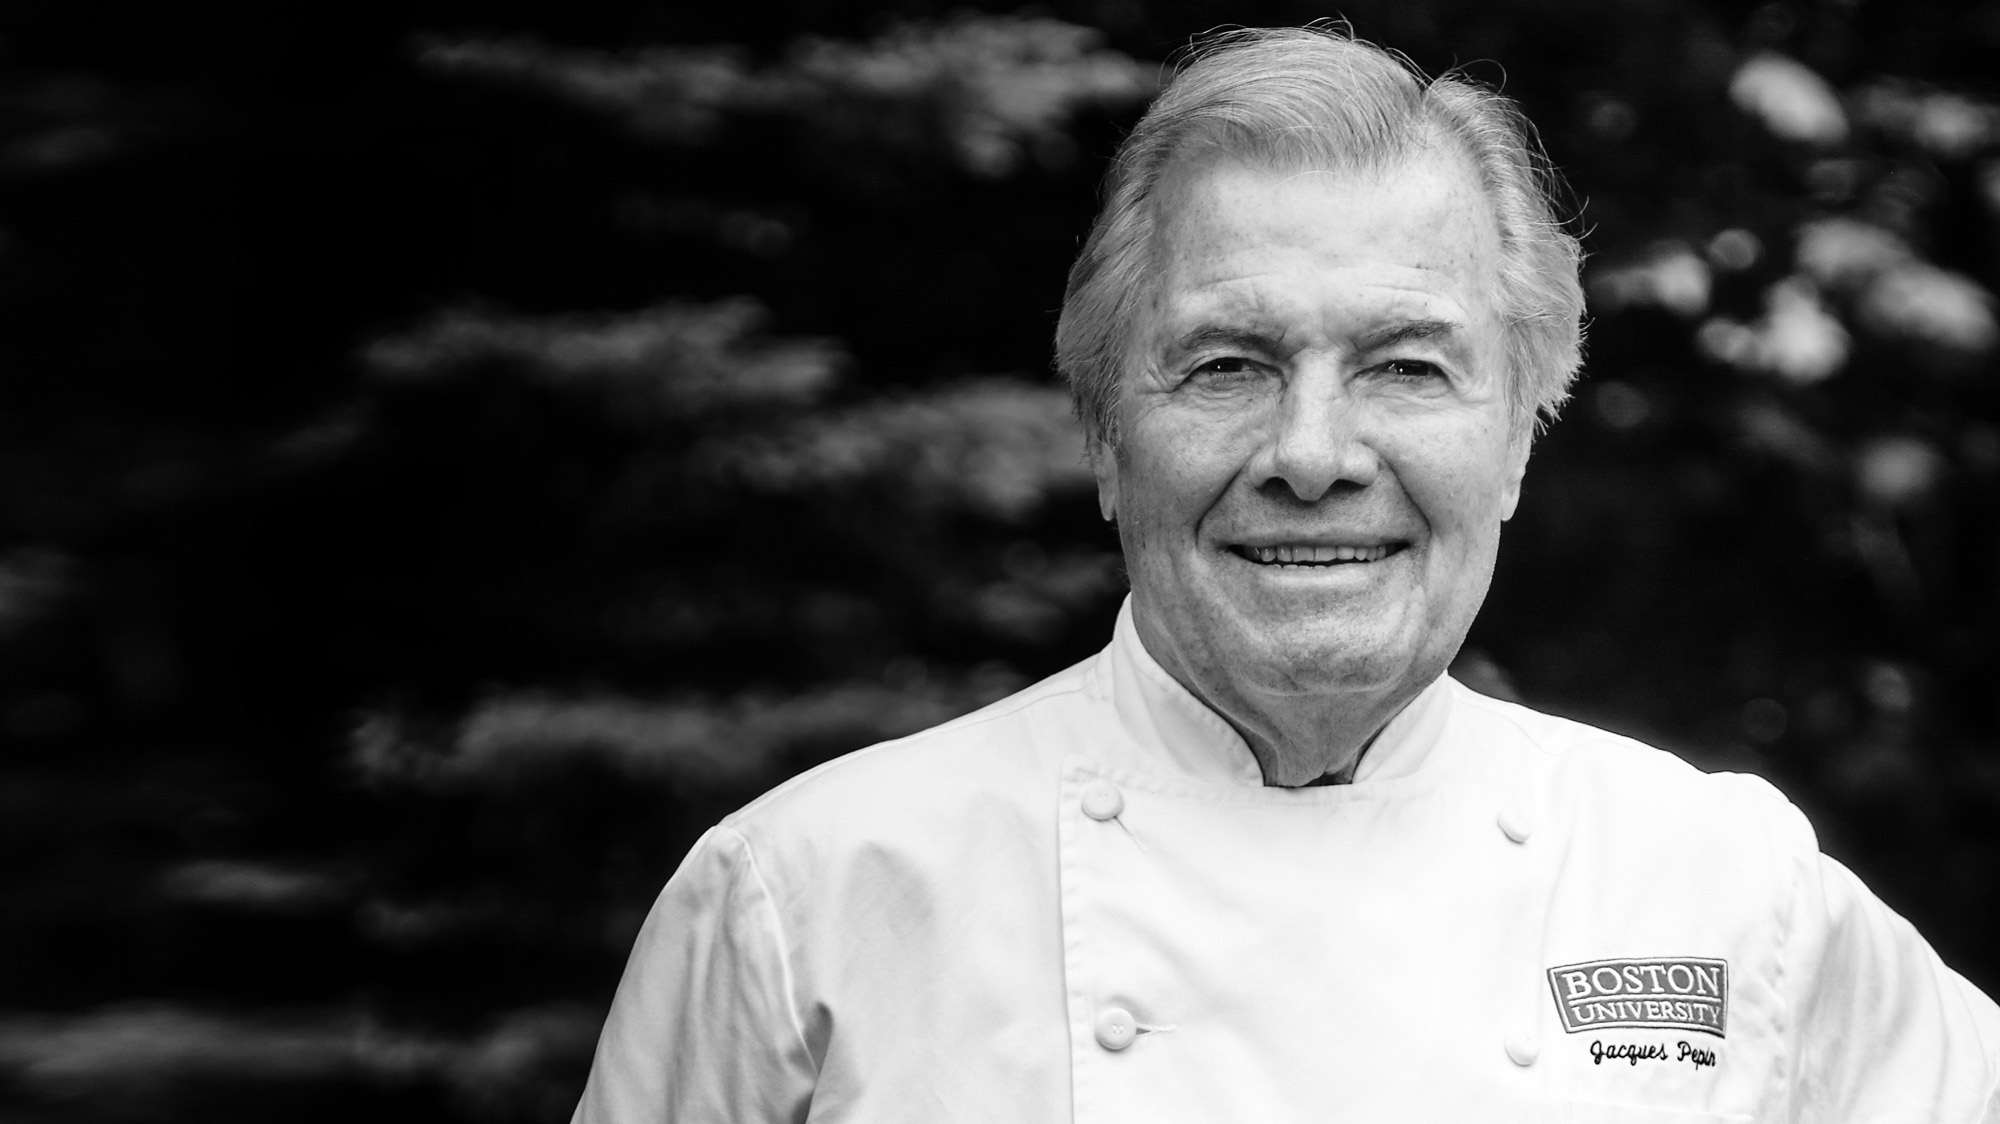 A portrait photo of chef Jacques Pepin in black and white